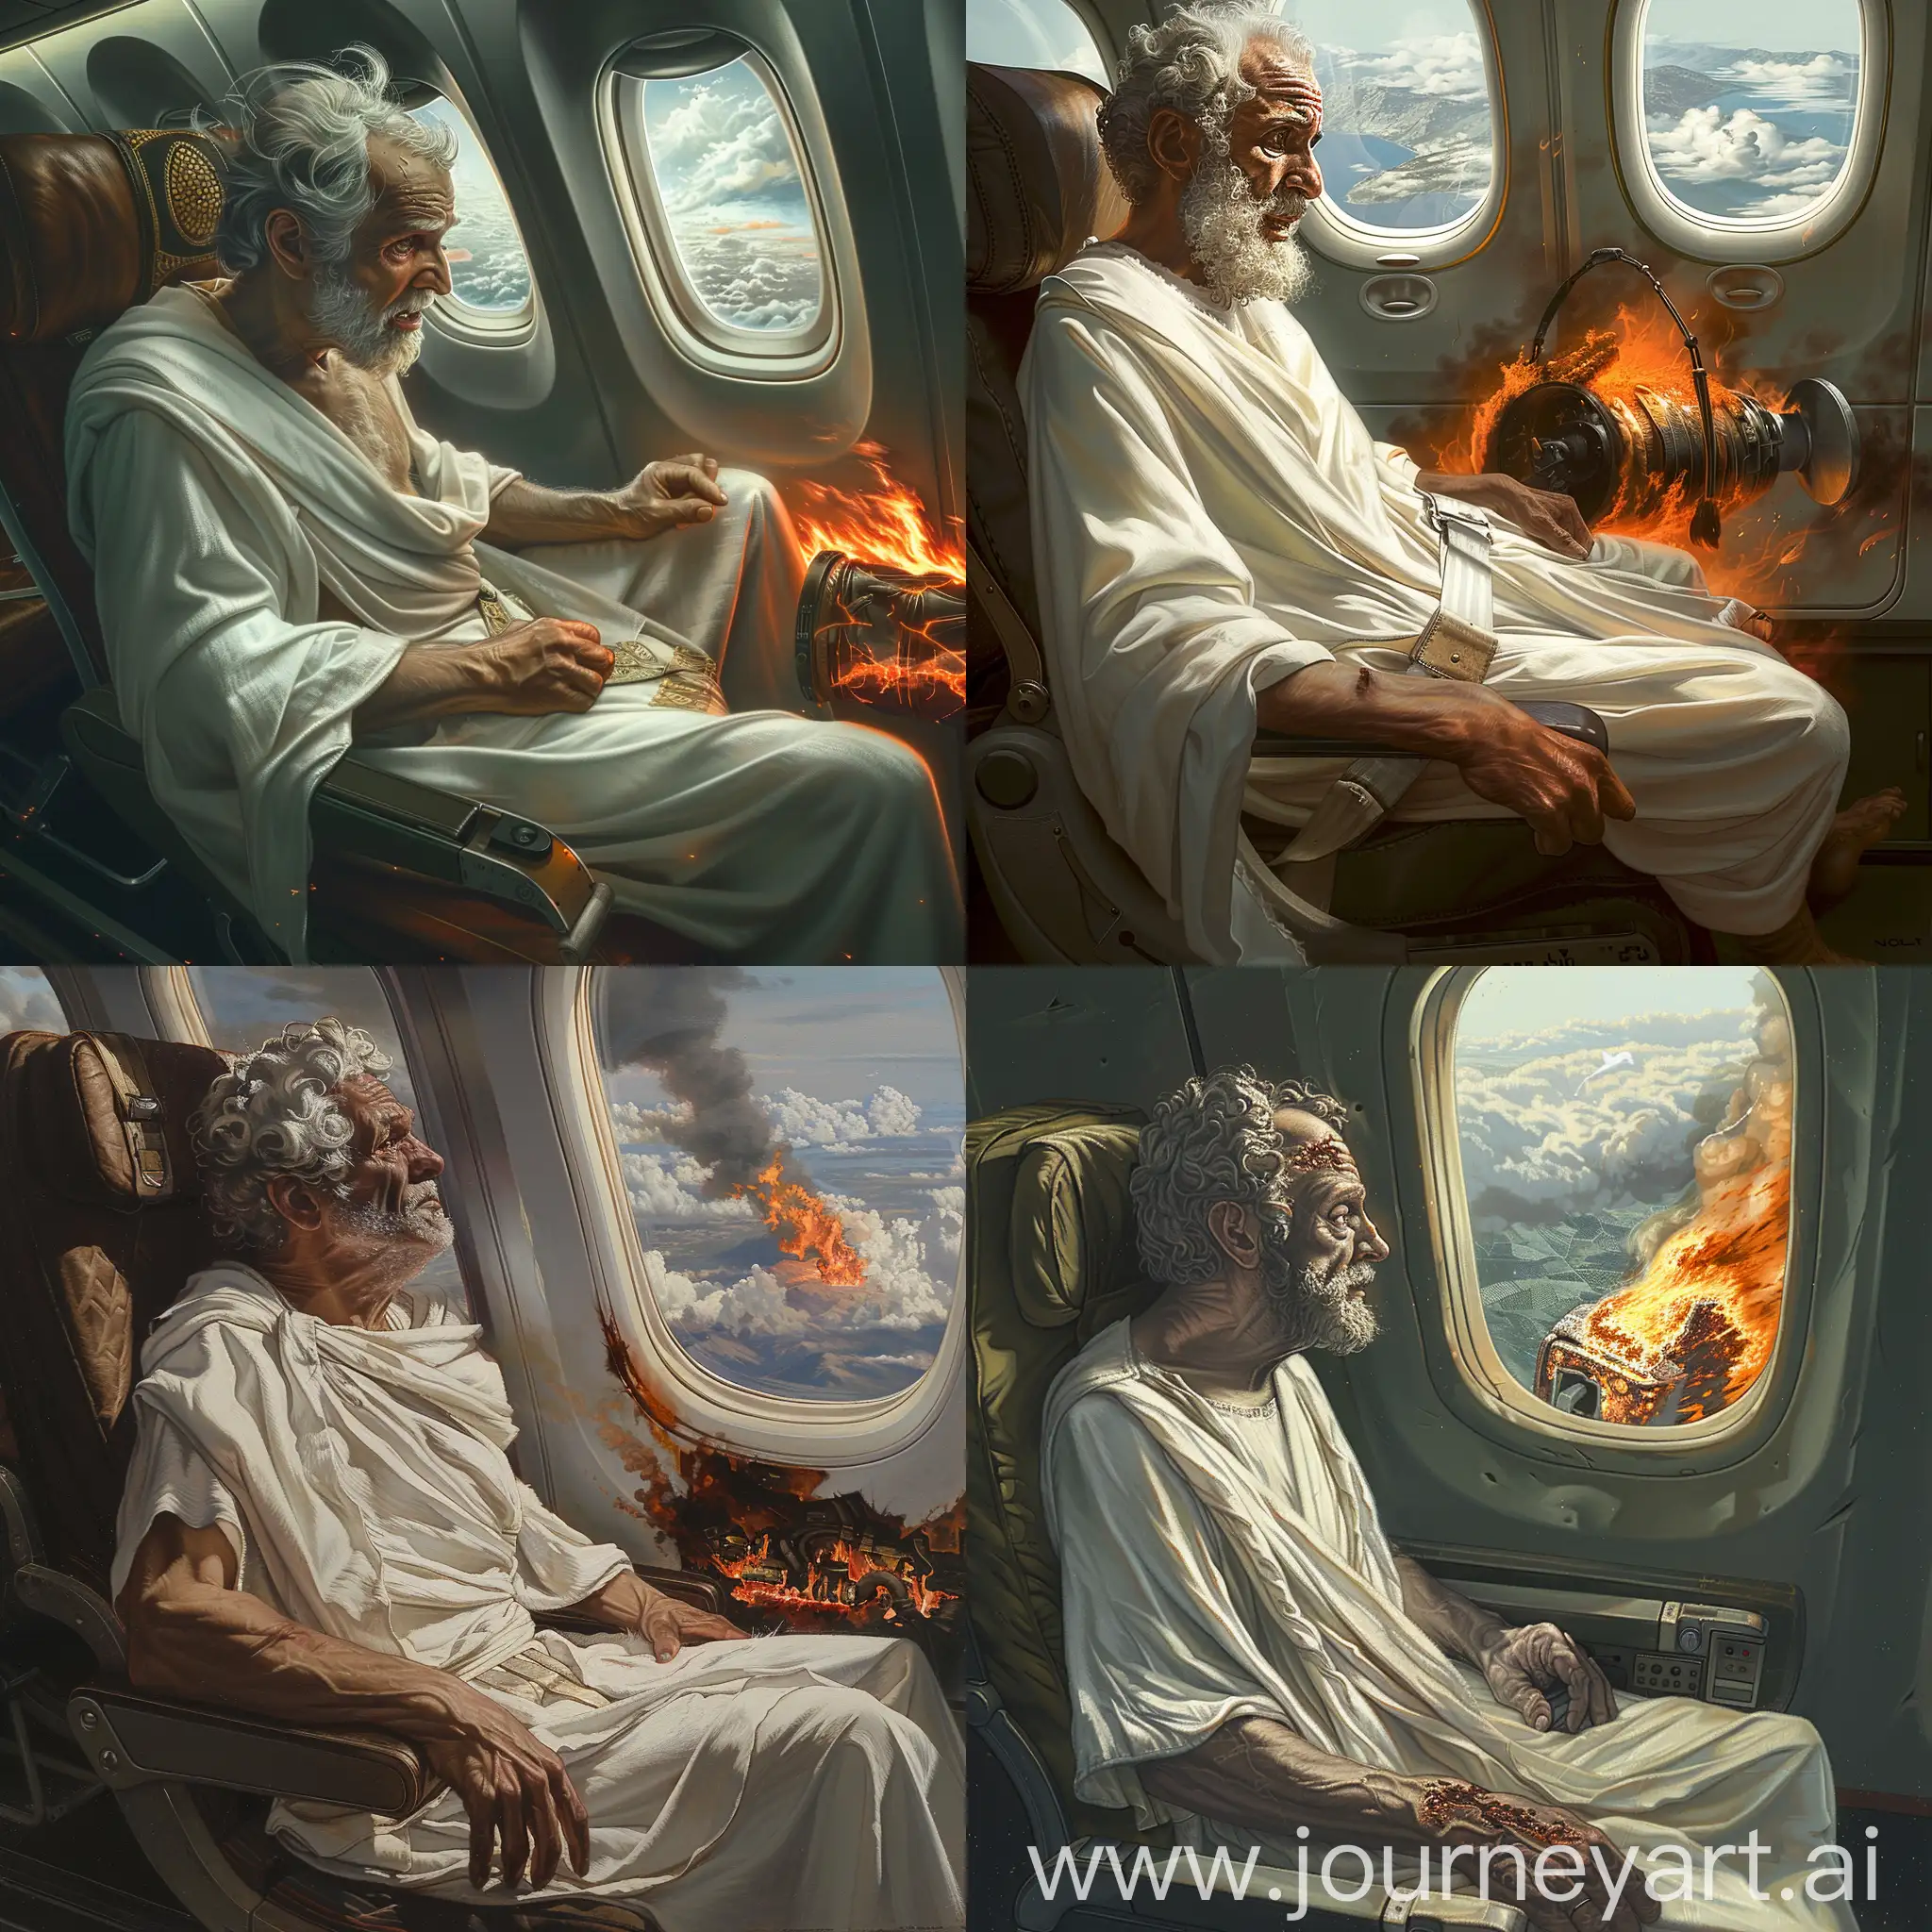 An ancient Greek philosopher in a white robe is sad, a bit afraid, he is flying on an airplane, sitting in a seat, looking out the window, and there is a burning engine of the plane under the wing 